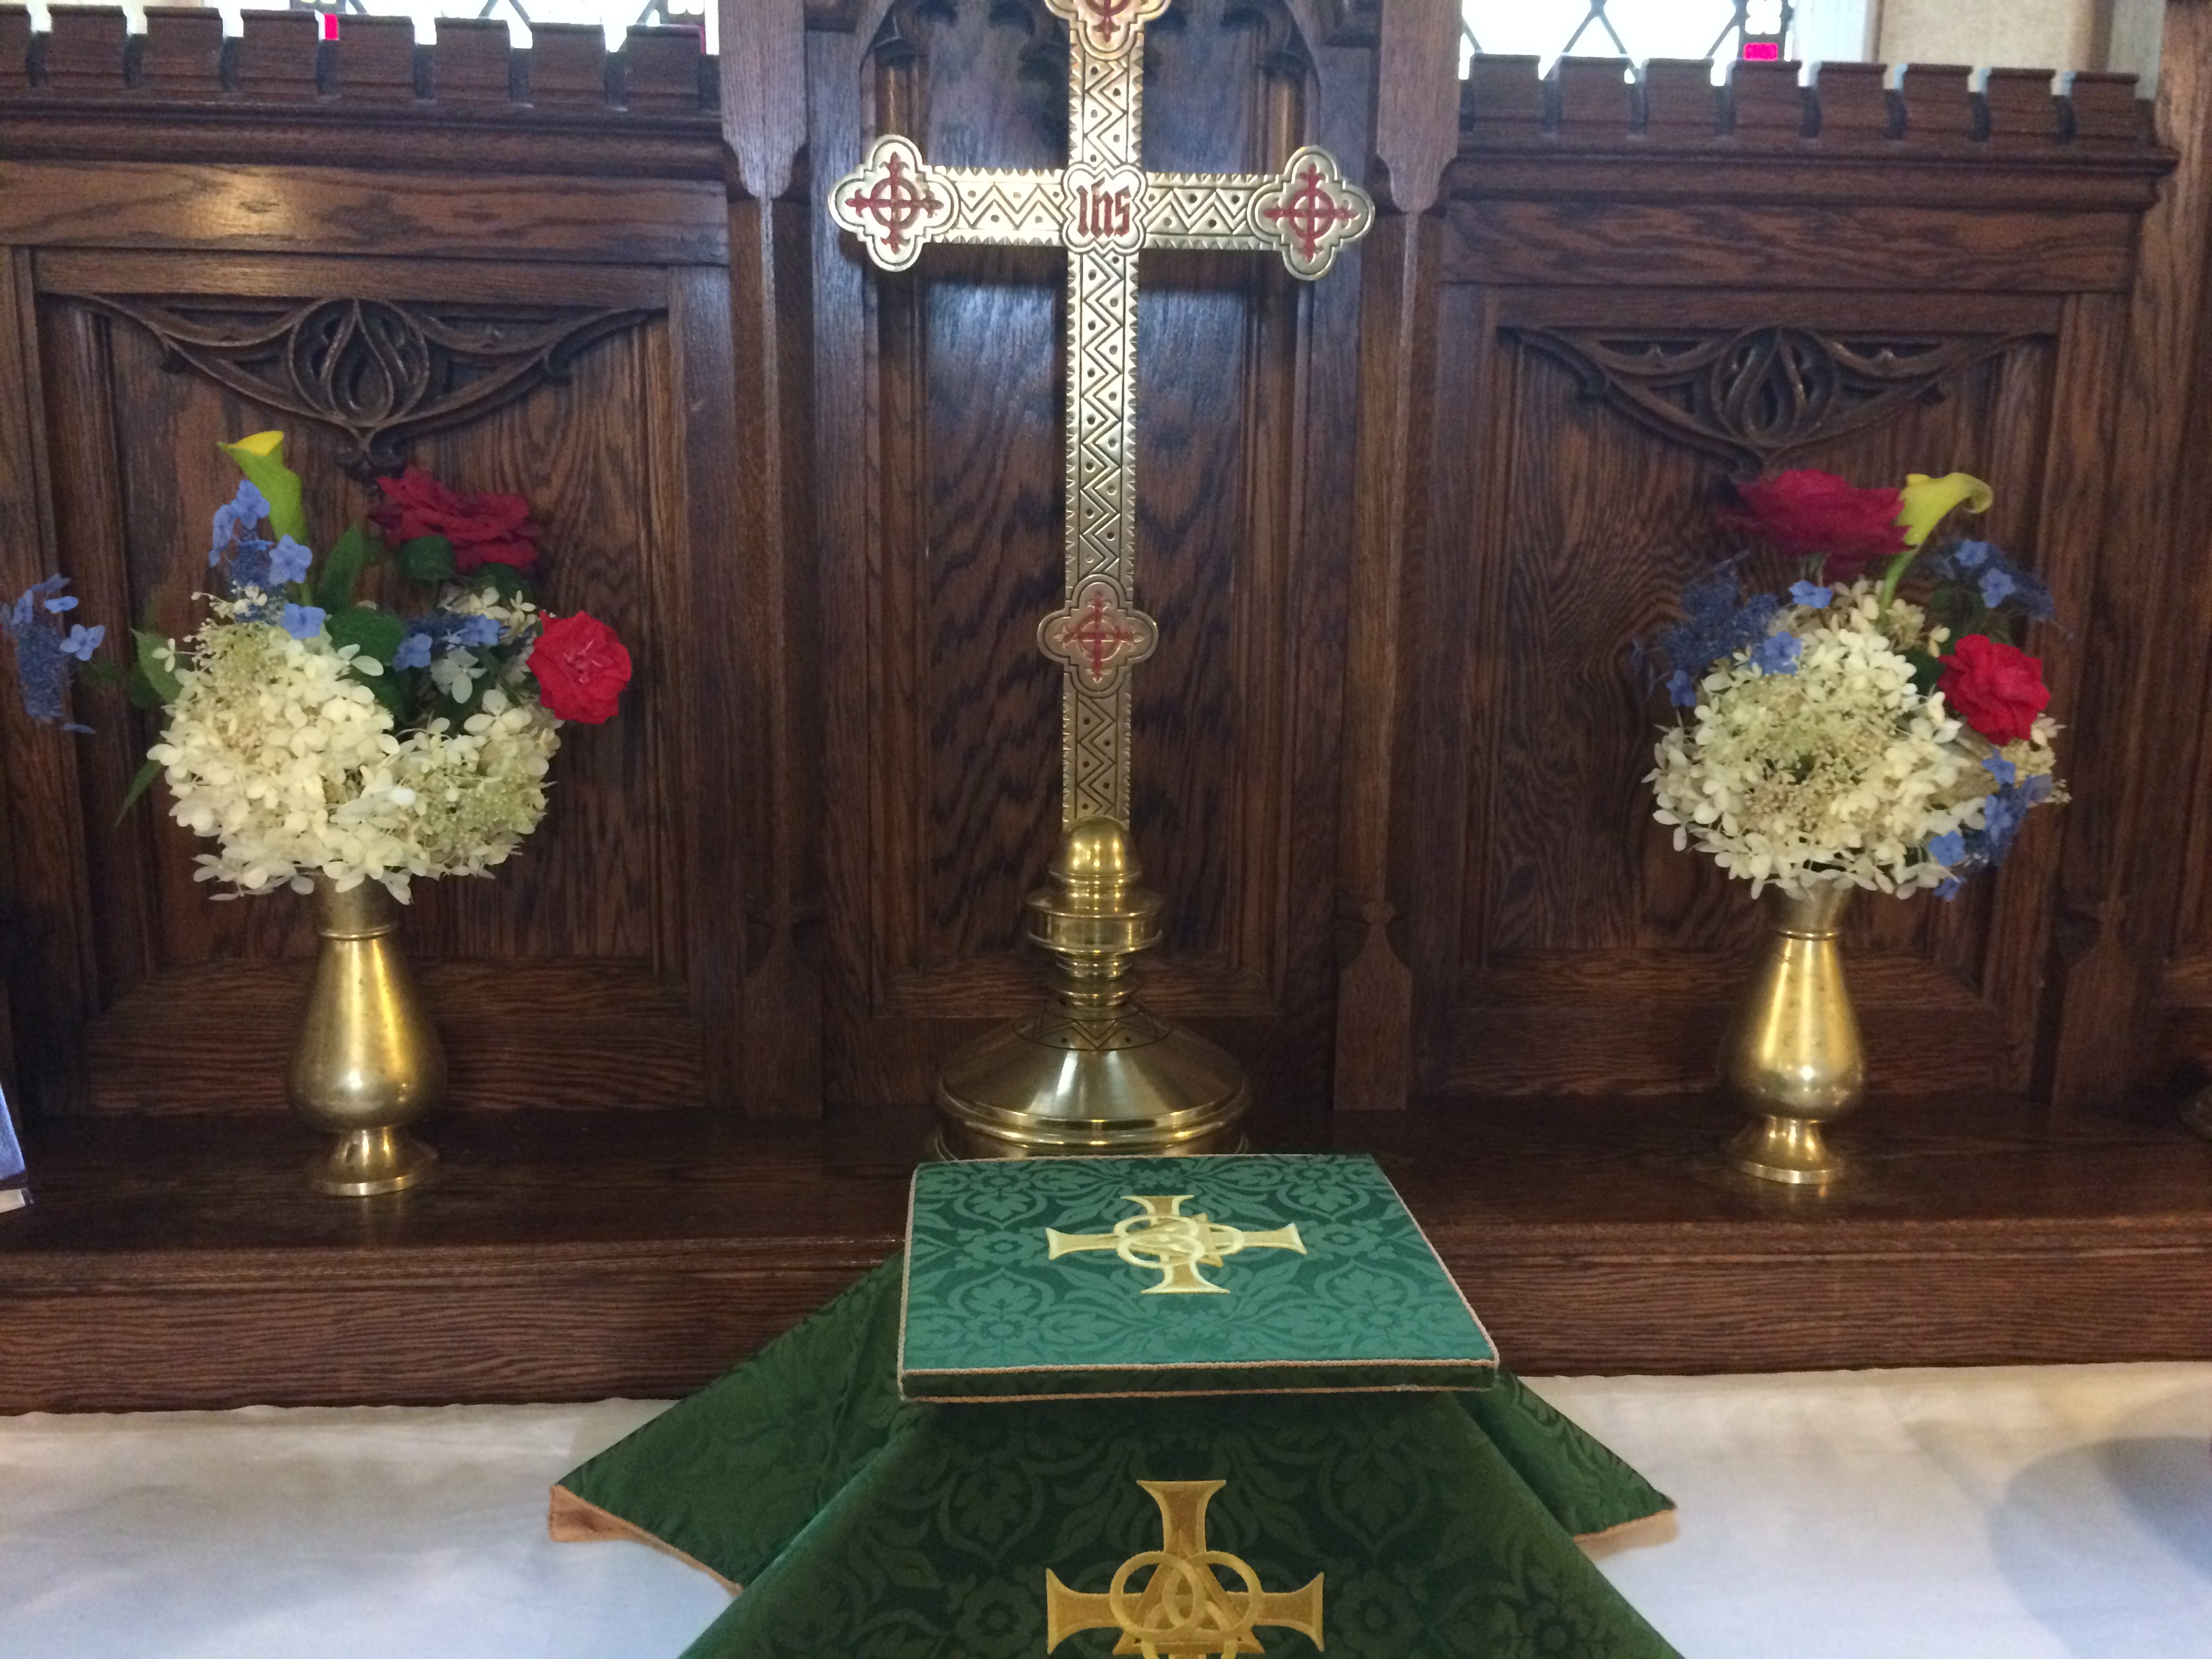 Sunday, August 7th at St. Luke's: Flowers on the Altar.